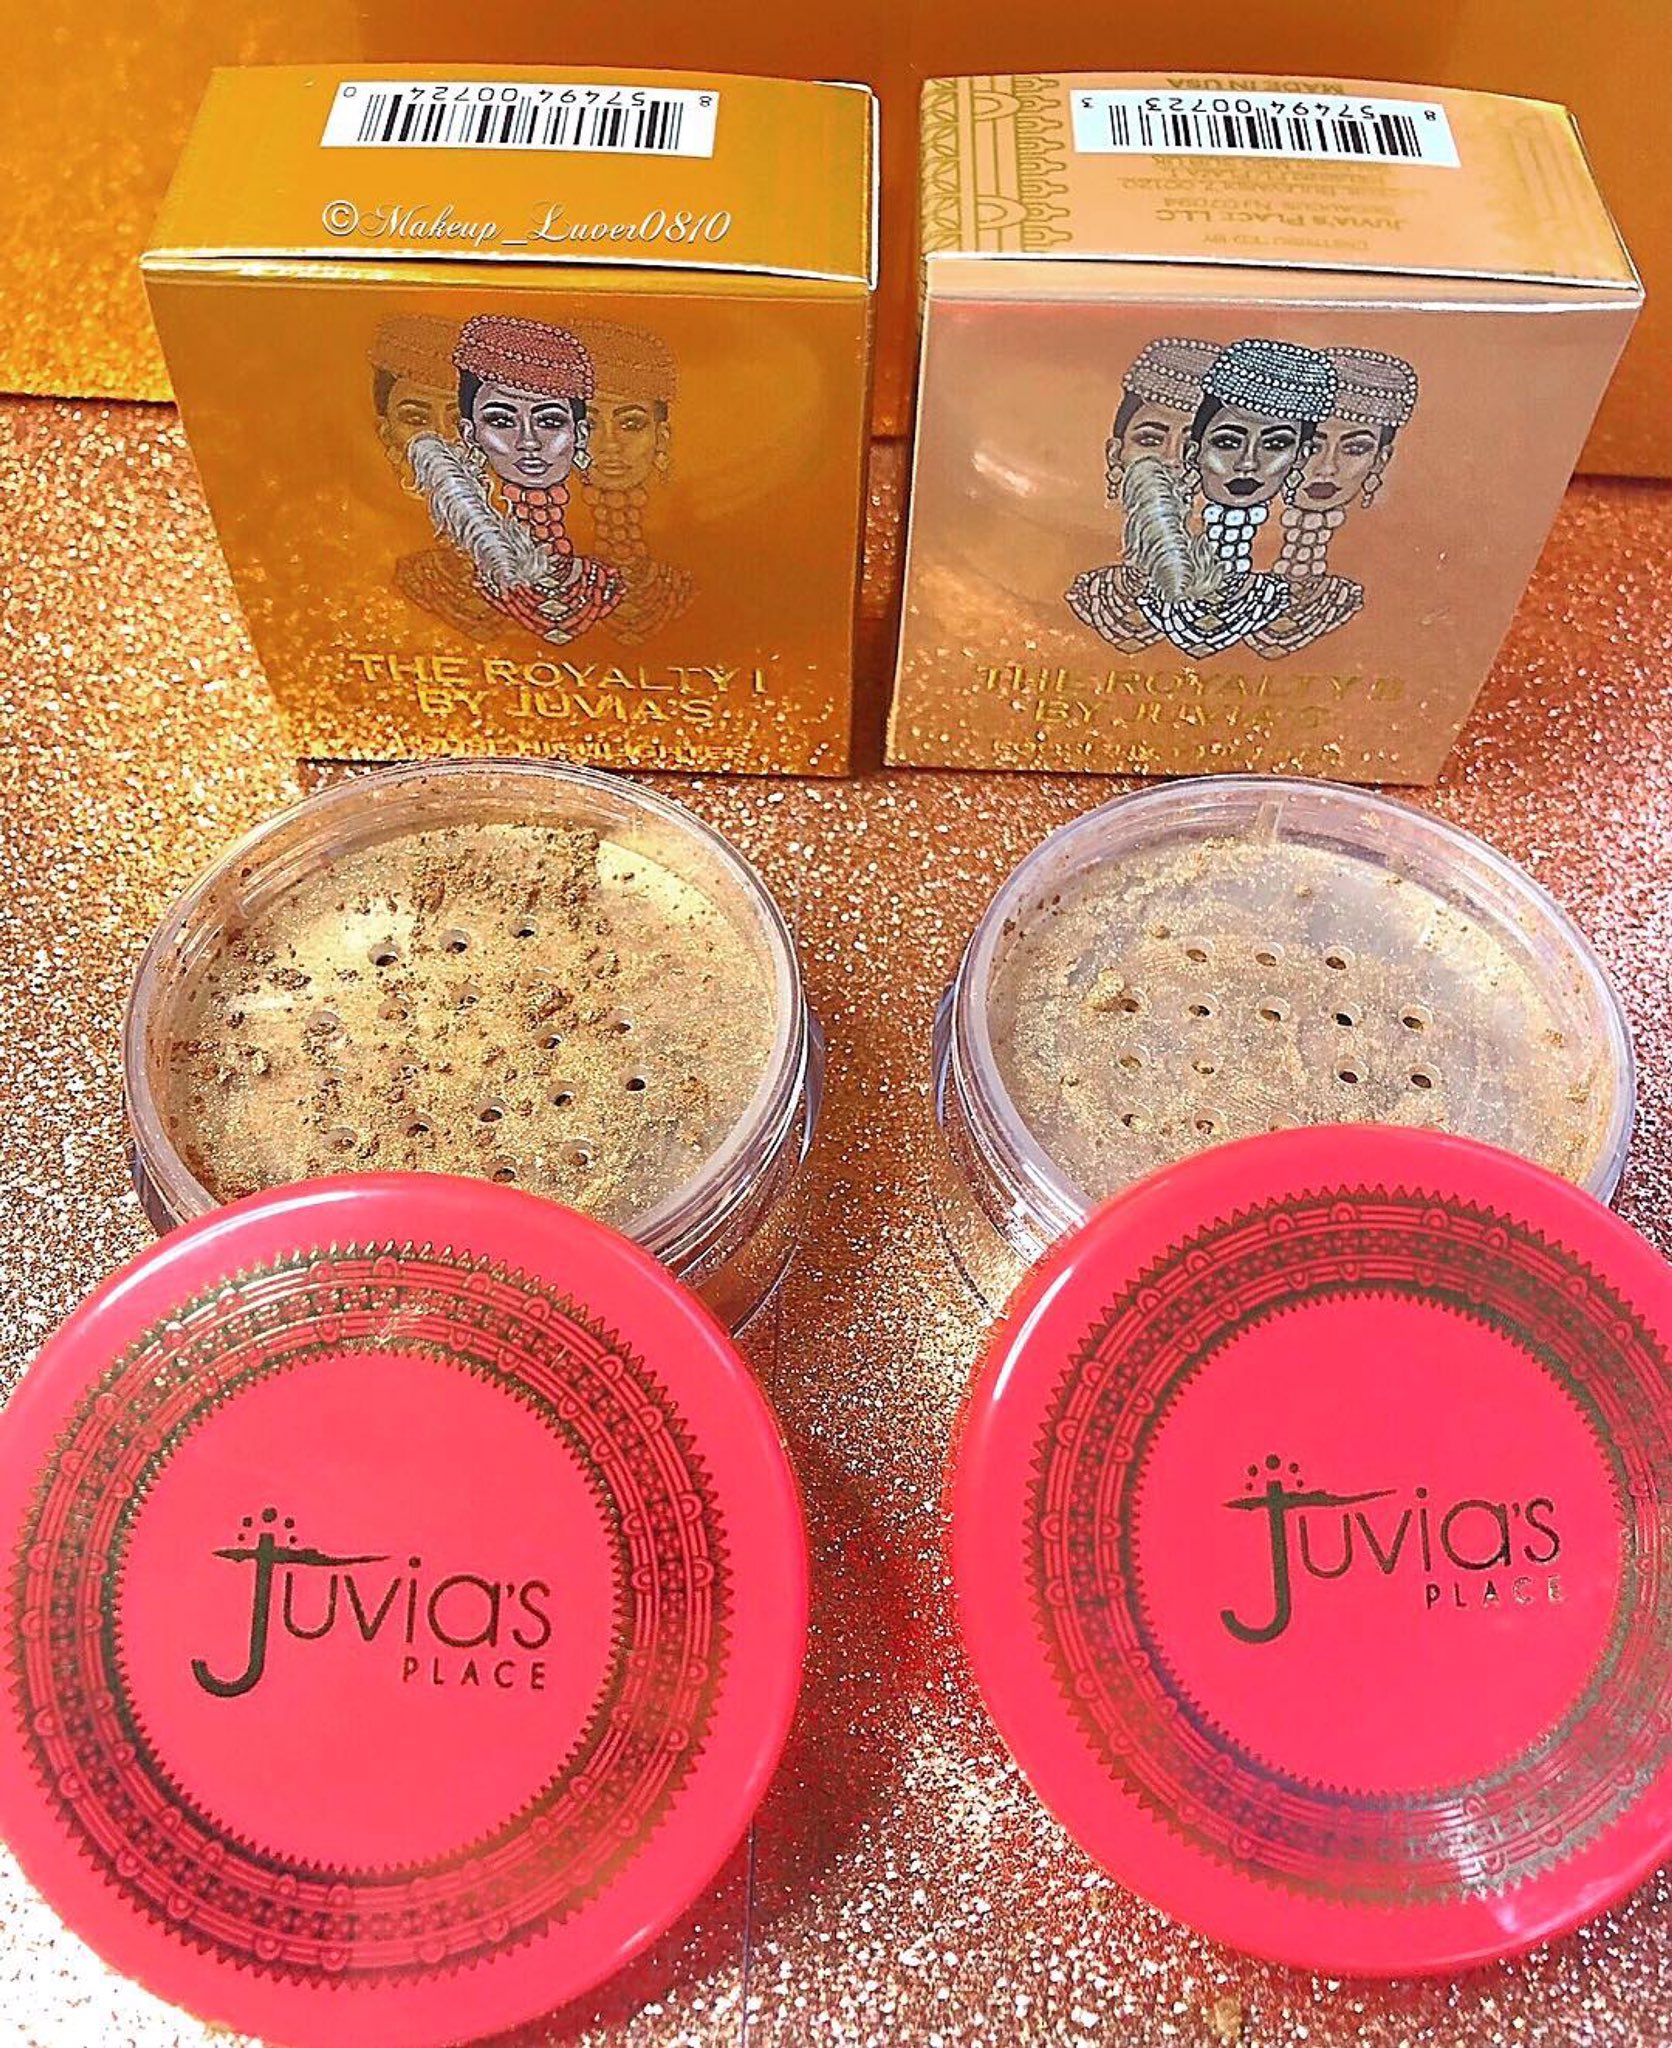 Juvia's Place on Twitter: "Royalty 1 and 2 Loose is everything . 50% off site wide makes this $7.00 each . 🏃🏿‍♀️🏃🏽 Limited Qualities left . https://t.co/psz0O4NiUq https://t.co/brInqe59fx" / Twitter